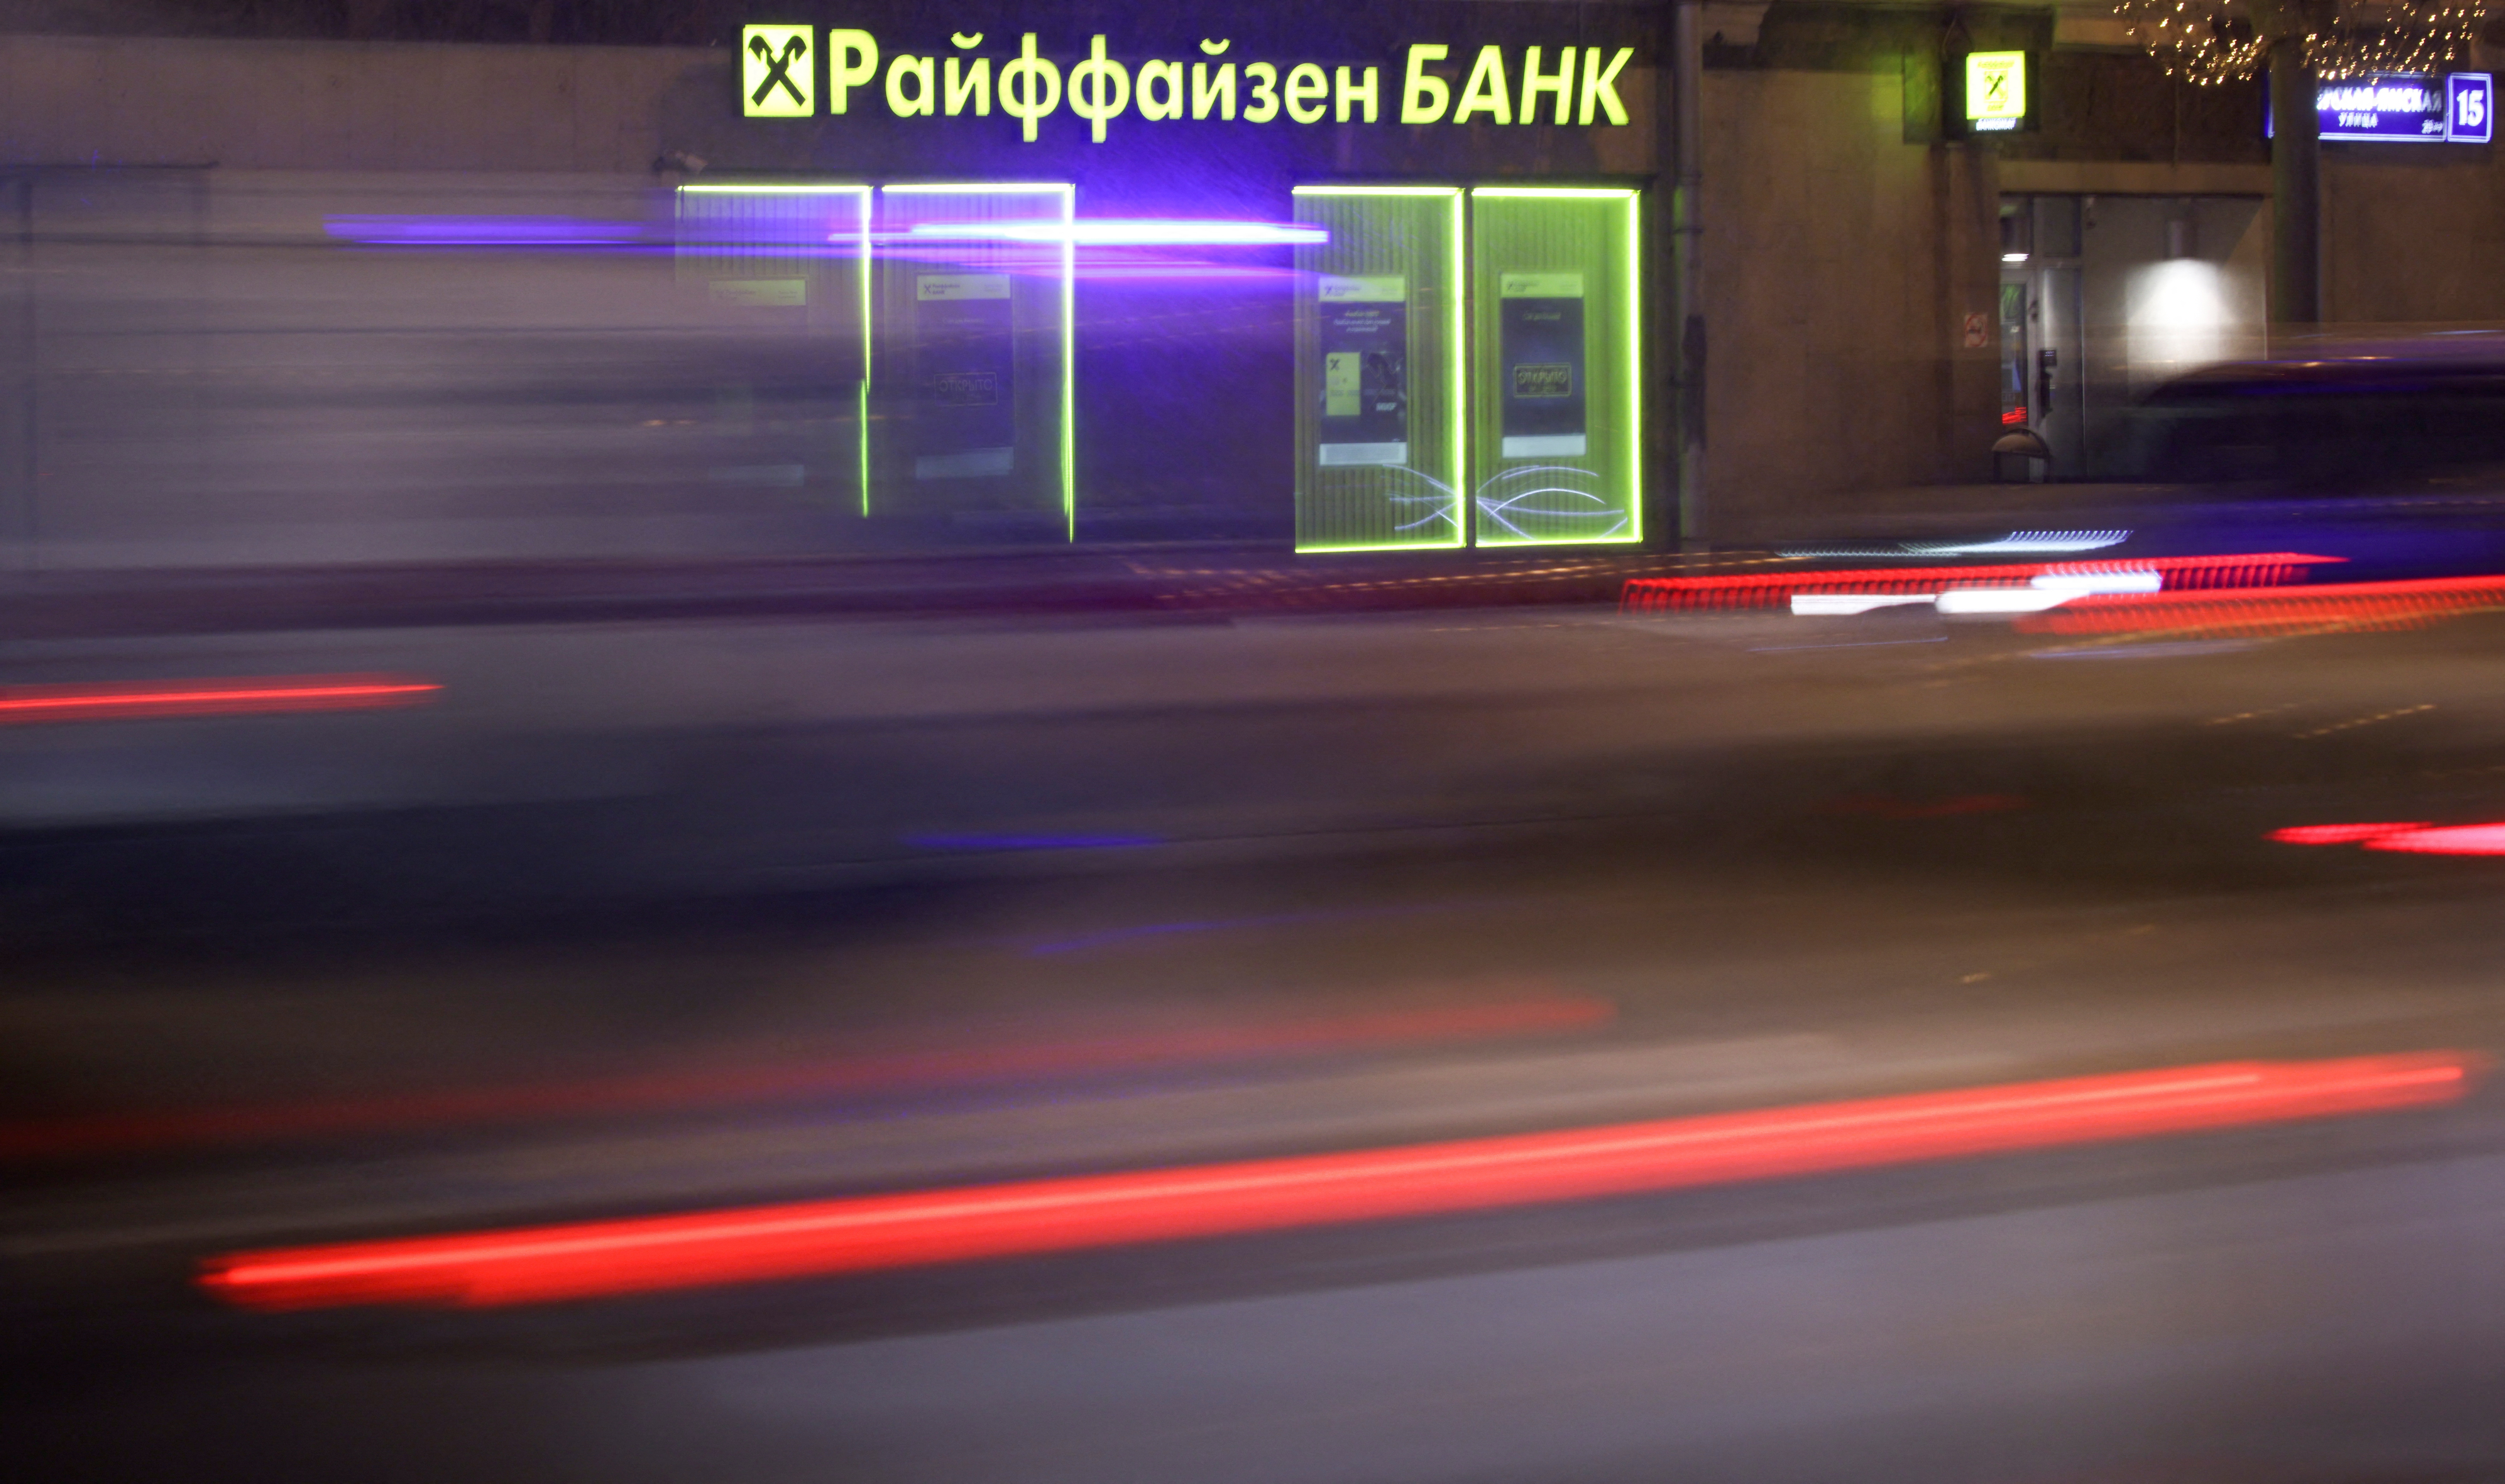 A view shows a branch of Raiffeisen Bank in Moscow